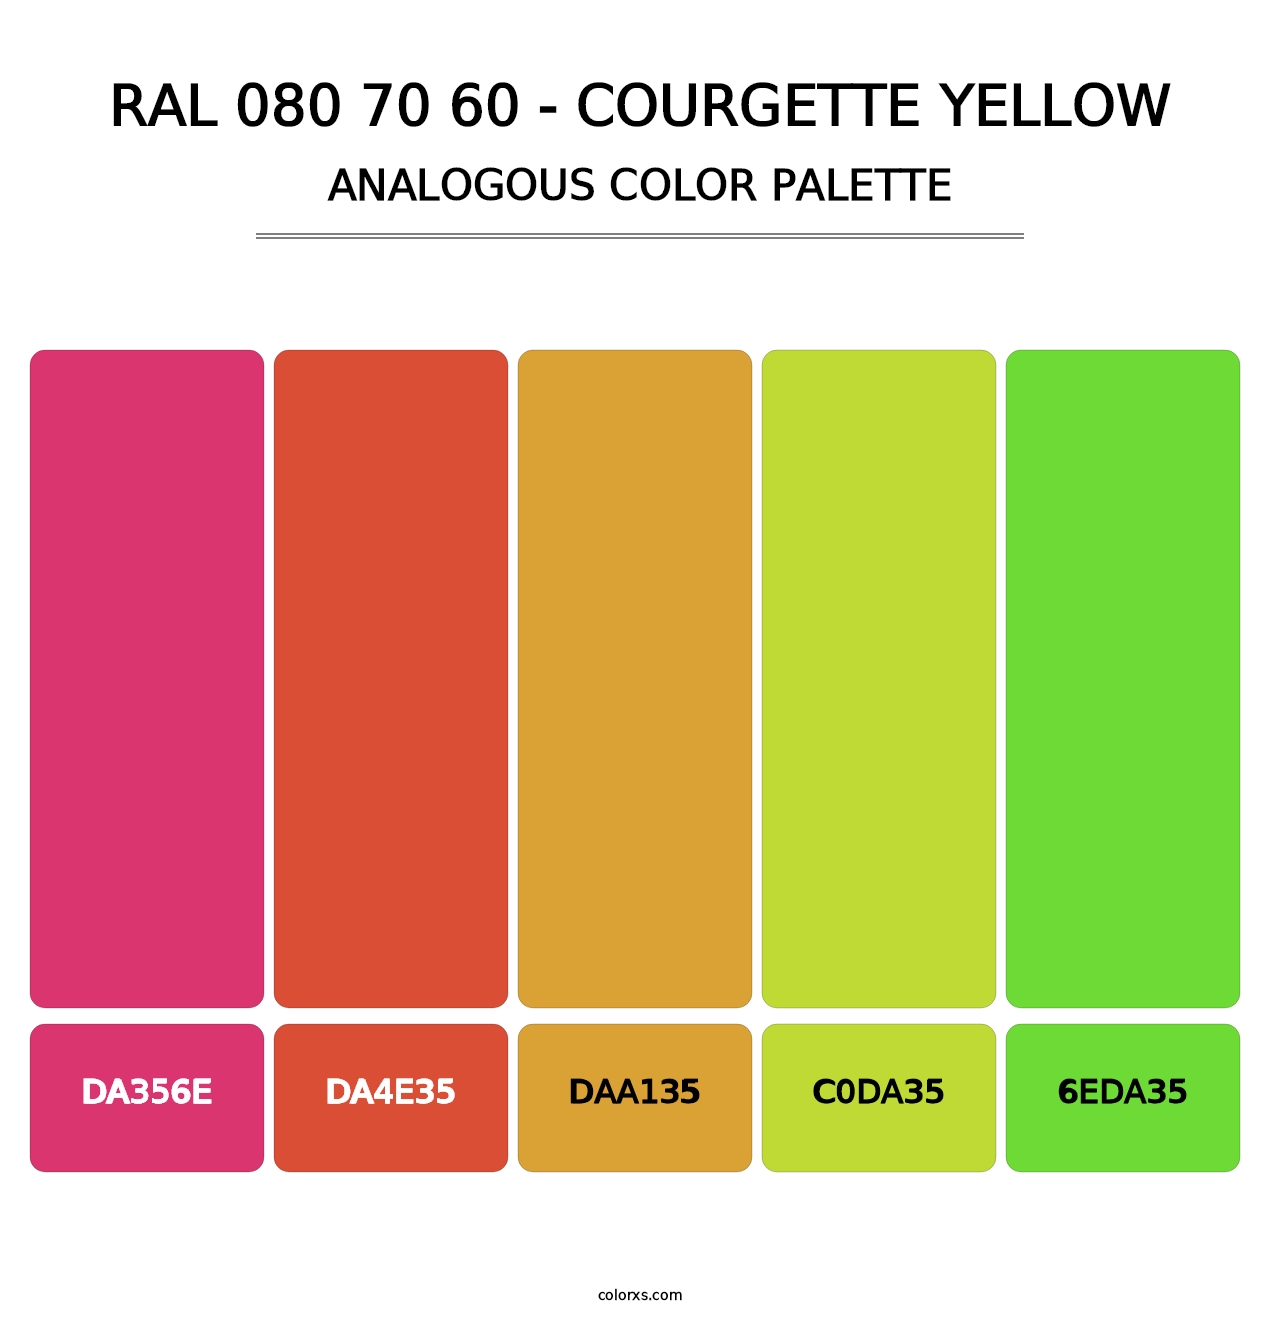 RAL 080 70 60 - Courgette Yellow - Analogous Color Palette